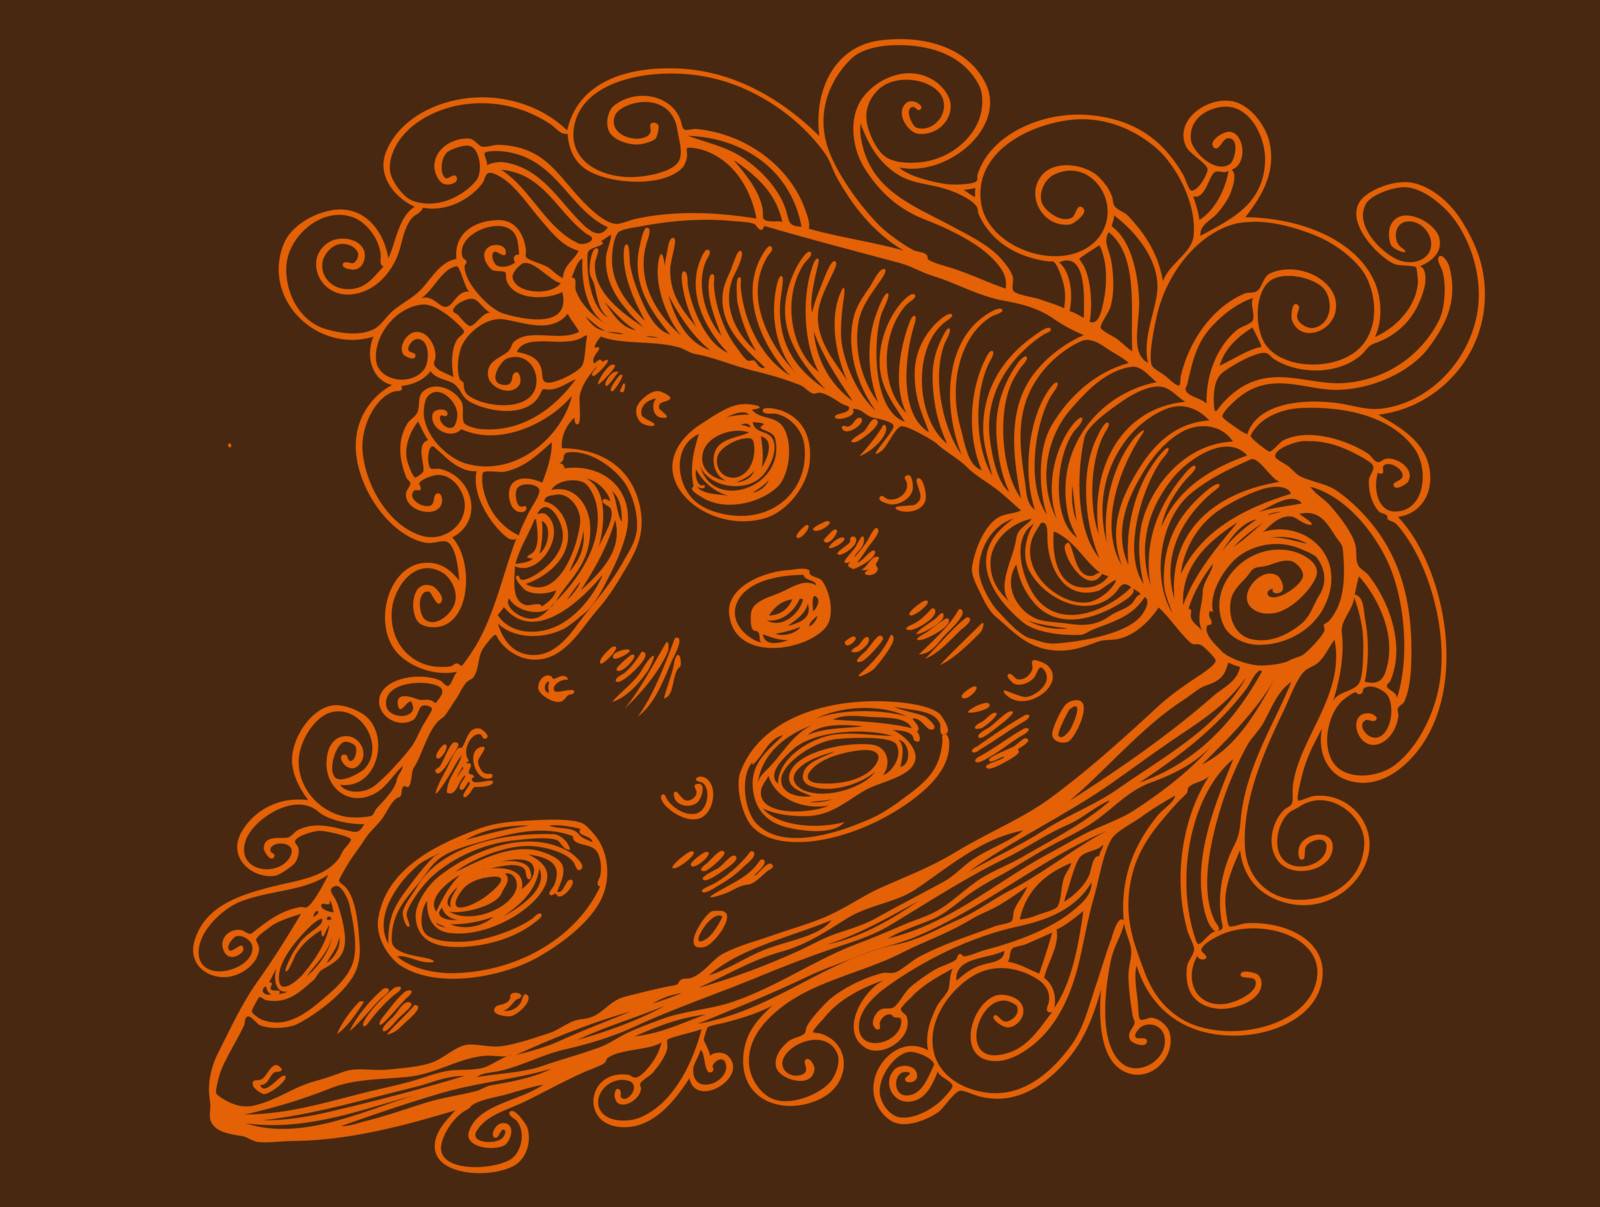 A hand drawn sketch of pizza with swirls background.